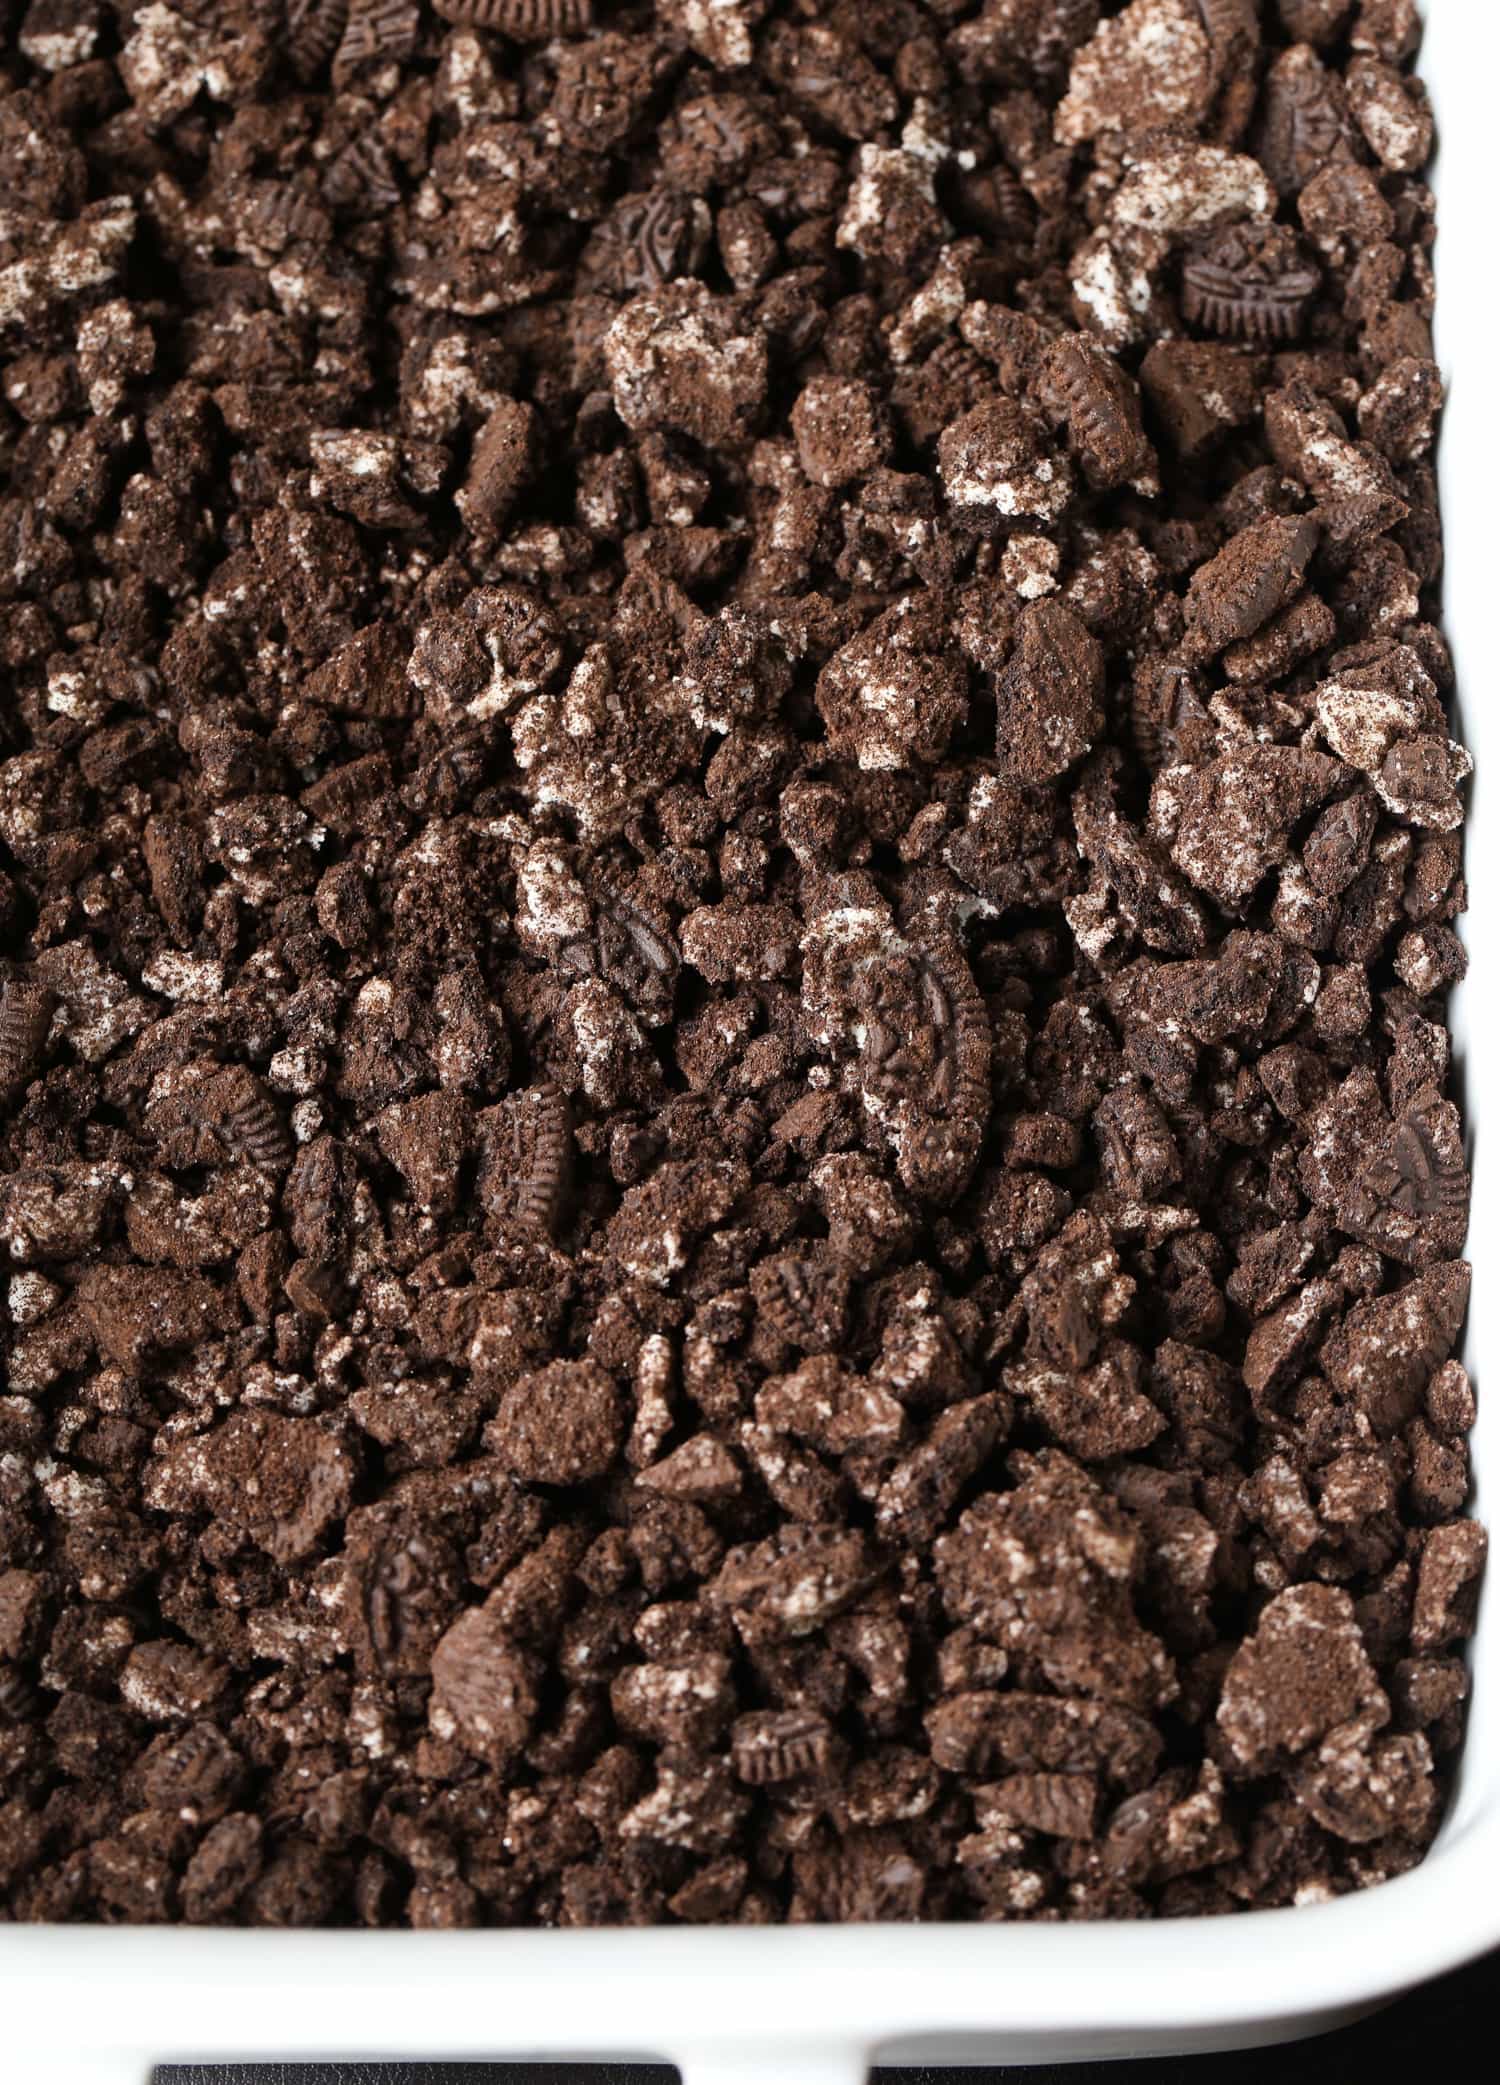 Crushed chocolate cookie crumbs are spread over top of the cream cheese cake filling.